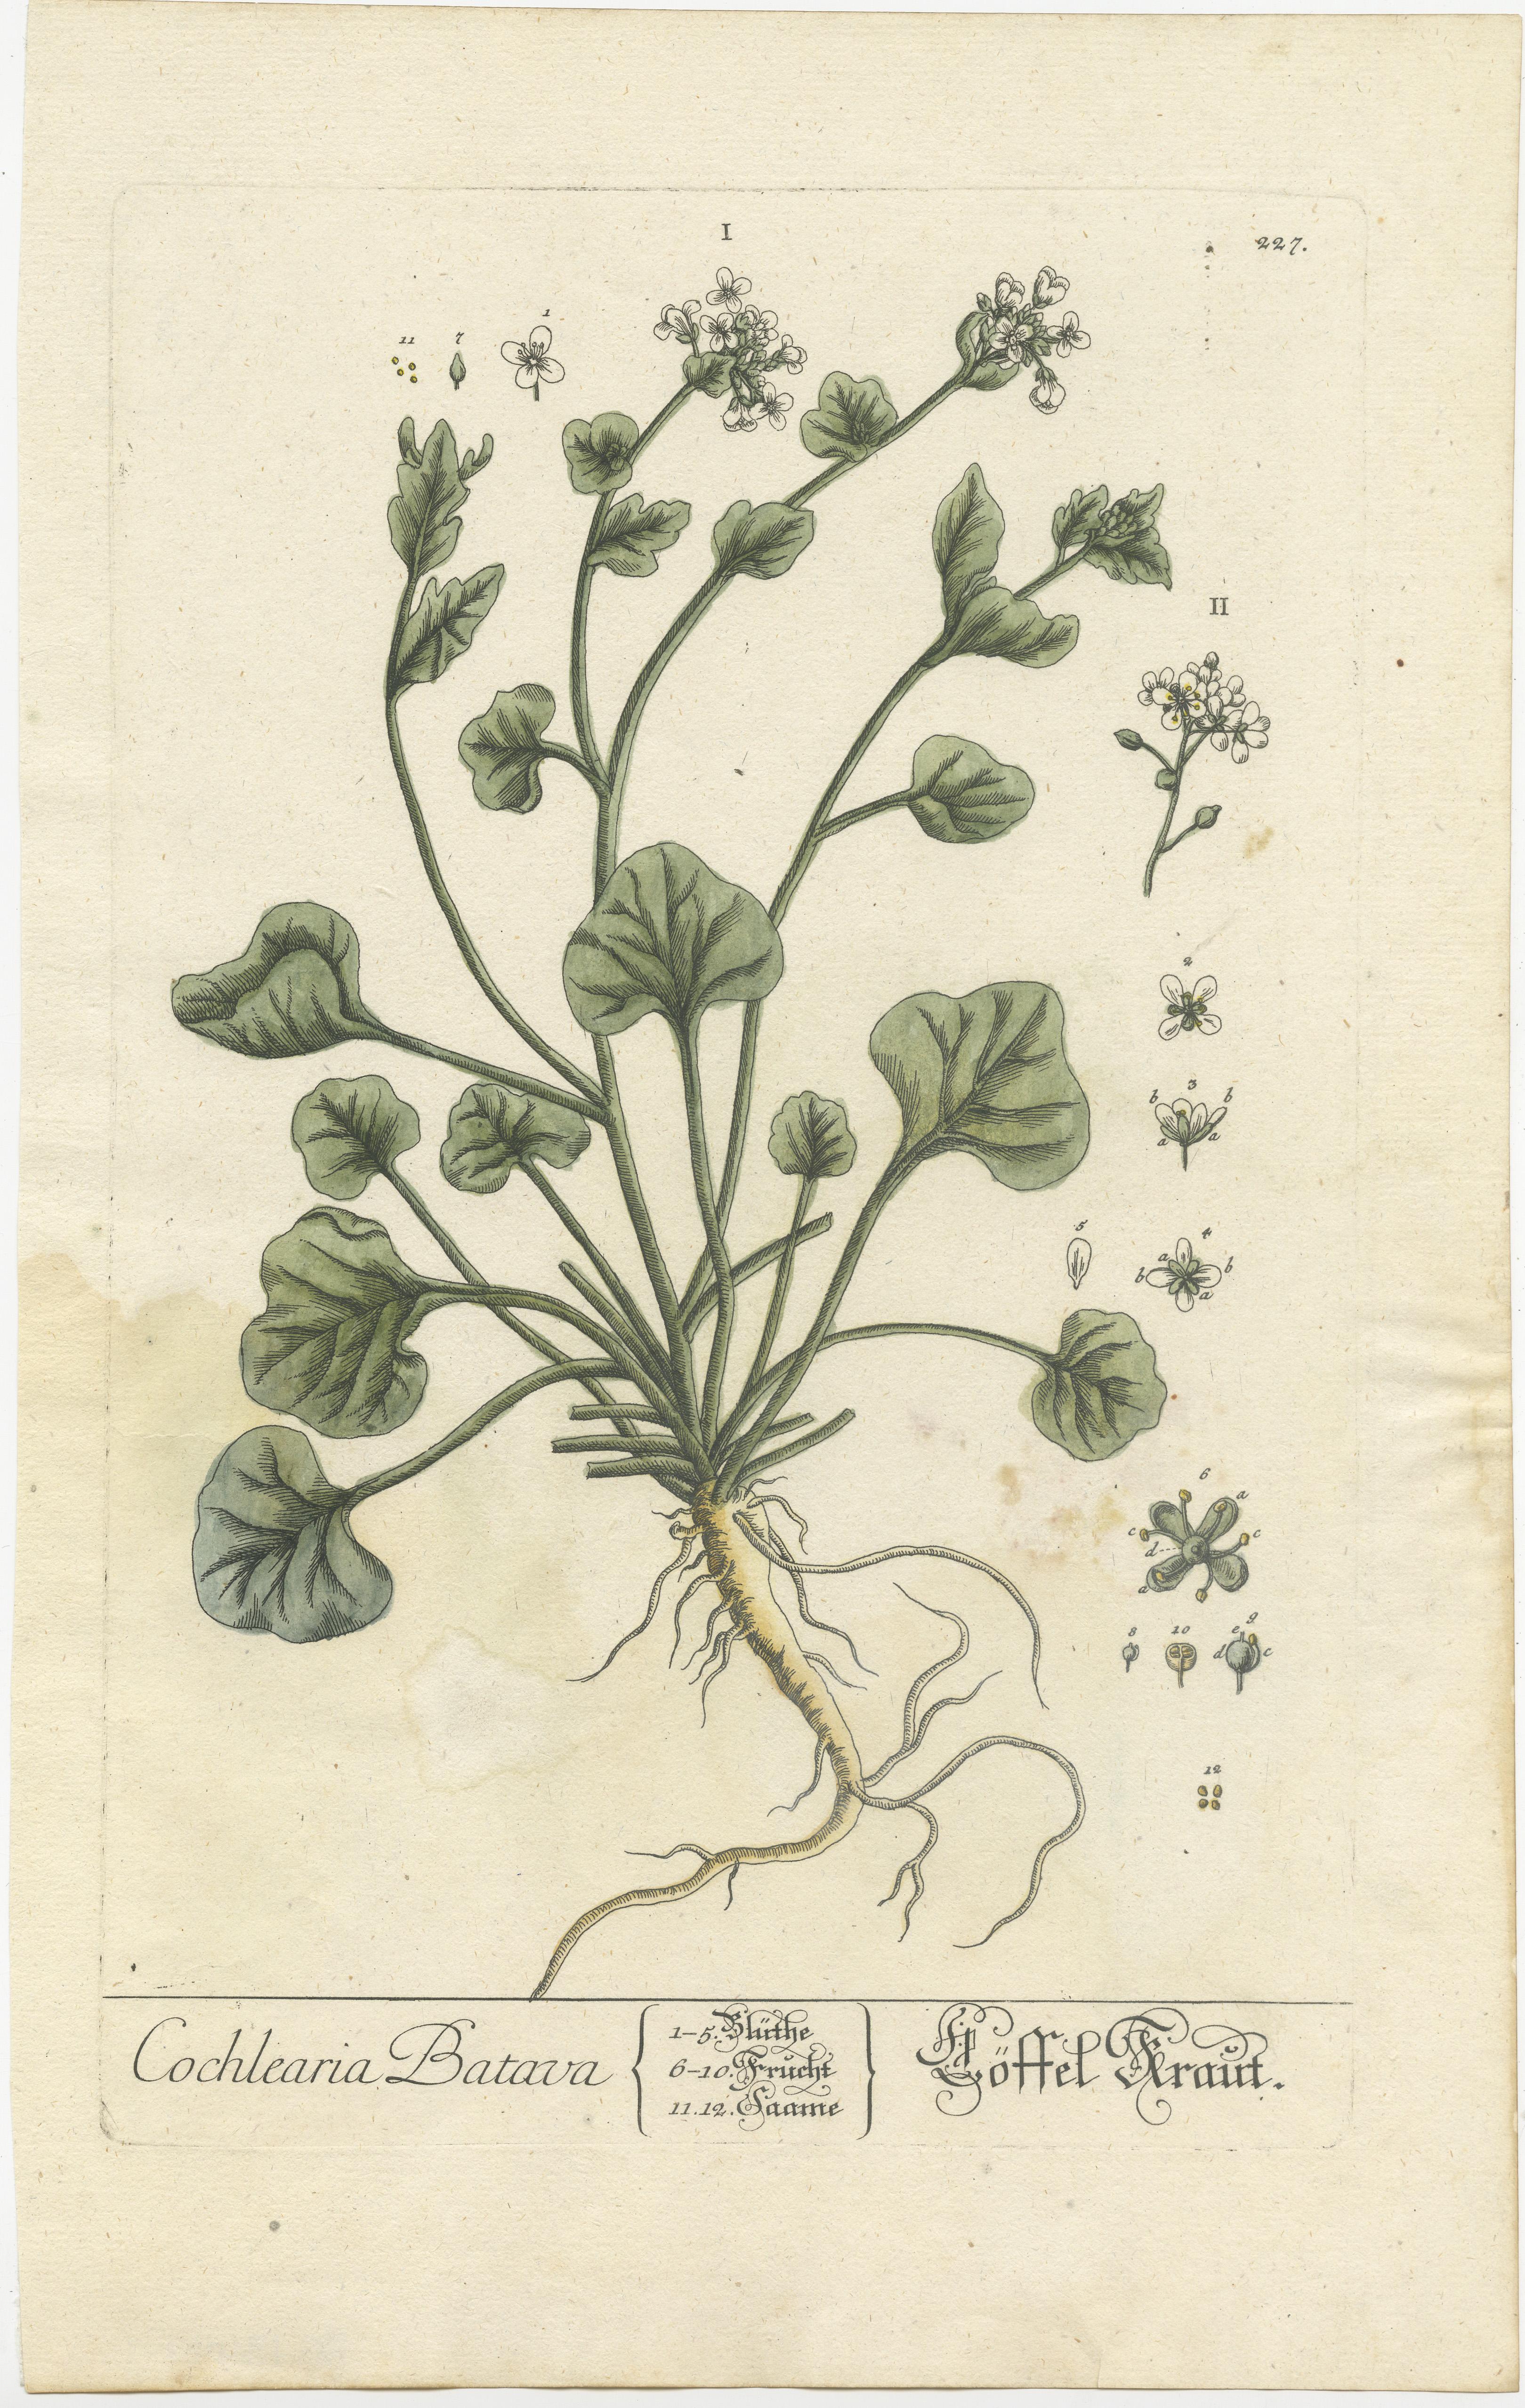 Antique print titled 'Cochlearia Batava'. Botanical print of cochlearia officinalis, common scurvygrass, scurvy-grass, or spoonwort. Published by or after Elisabeth Blackwell, circa 1750. 